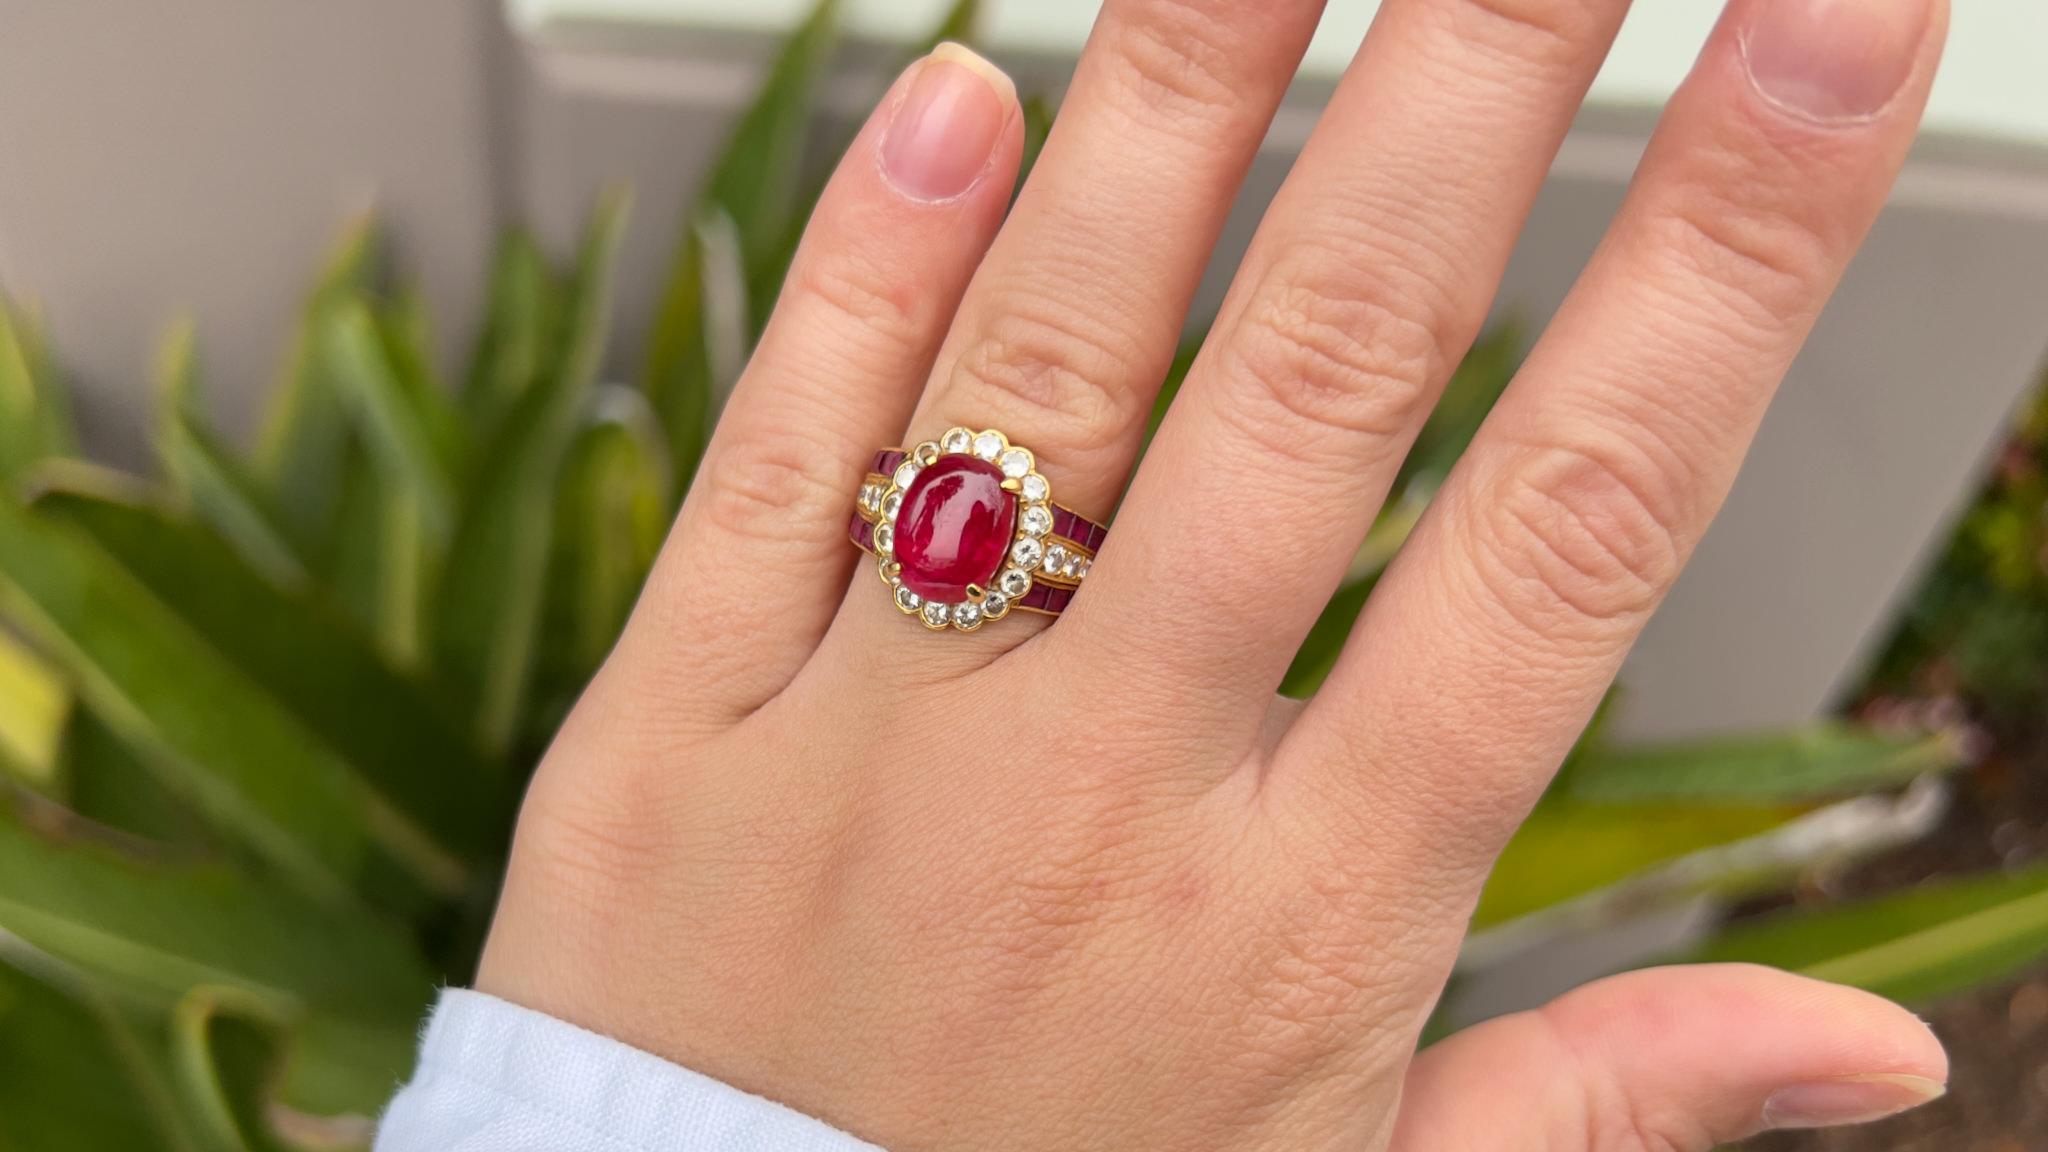 Modern Cabochon 4.40 Carat Red Spinel Ring With Diamonds And Rubies 18K Yellow Gold For Sale